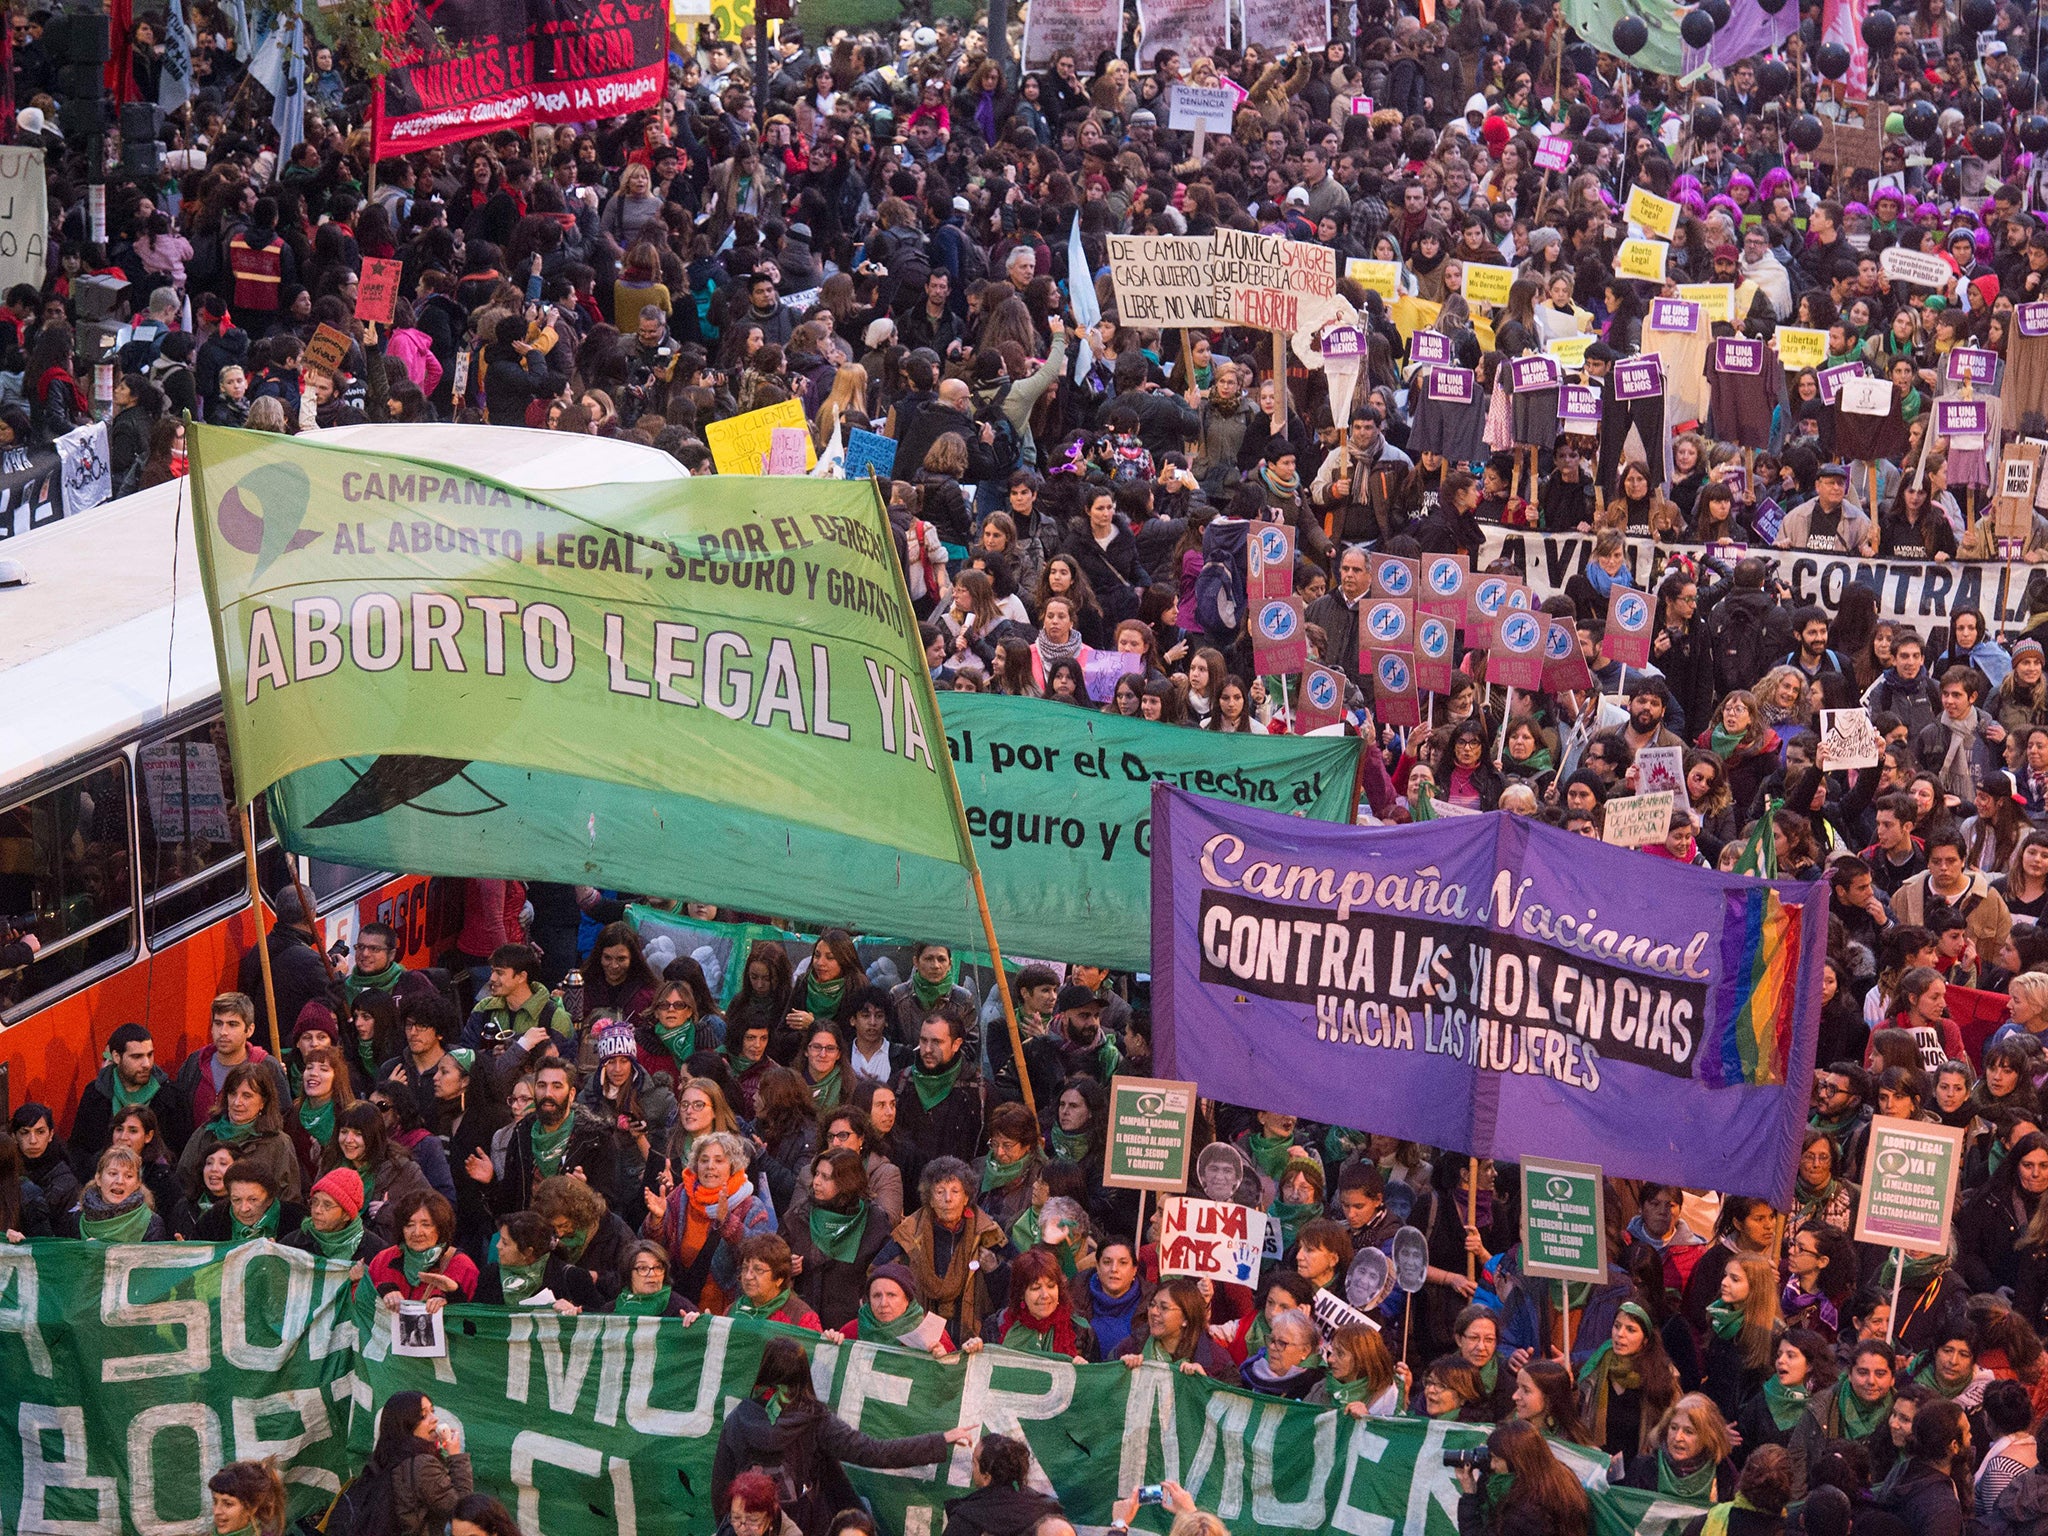 Women take part in the "Ni una menos" (Not One Less) march against gender-based violence in Argentina